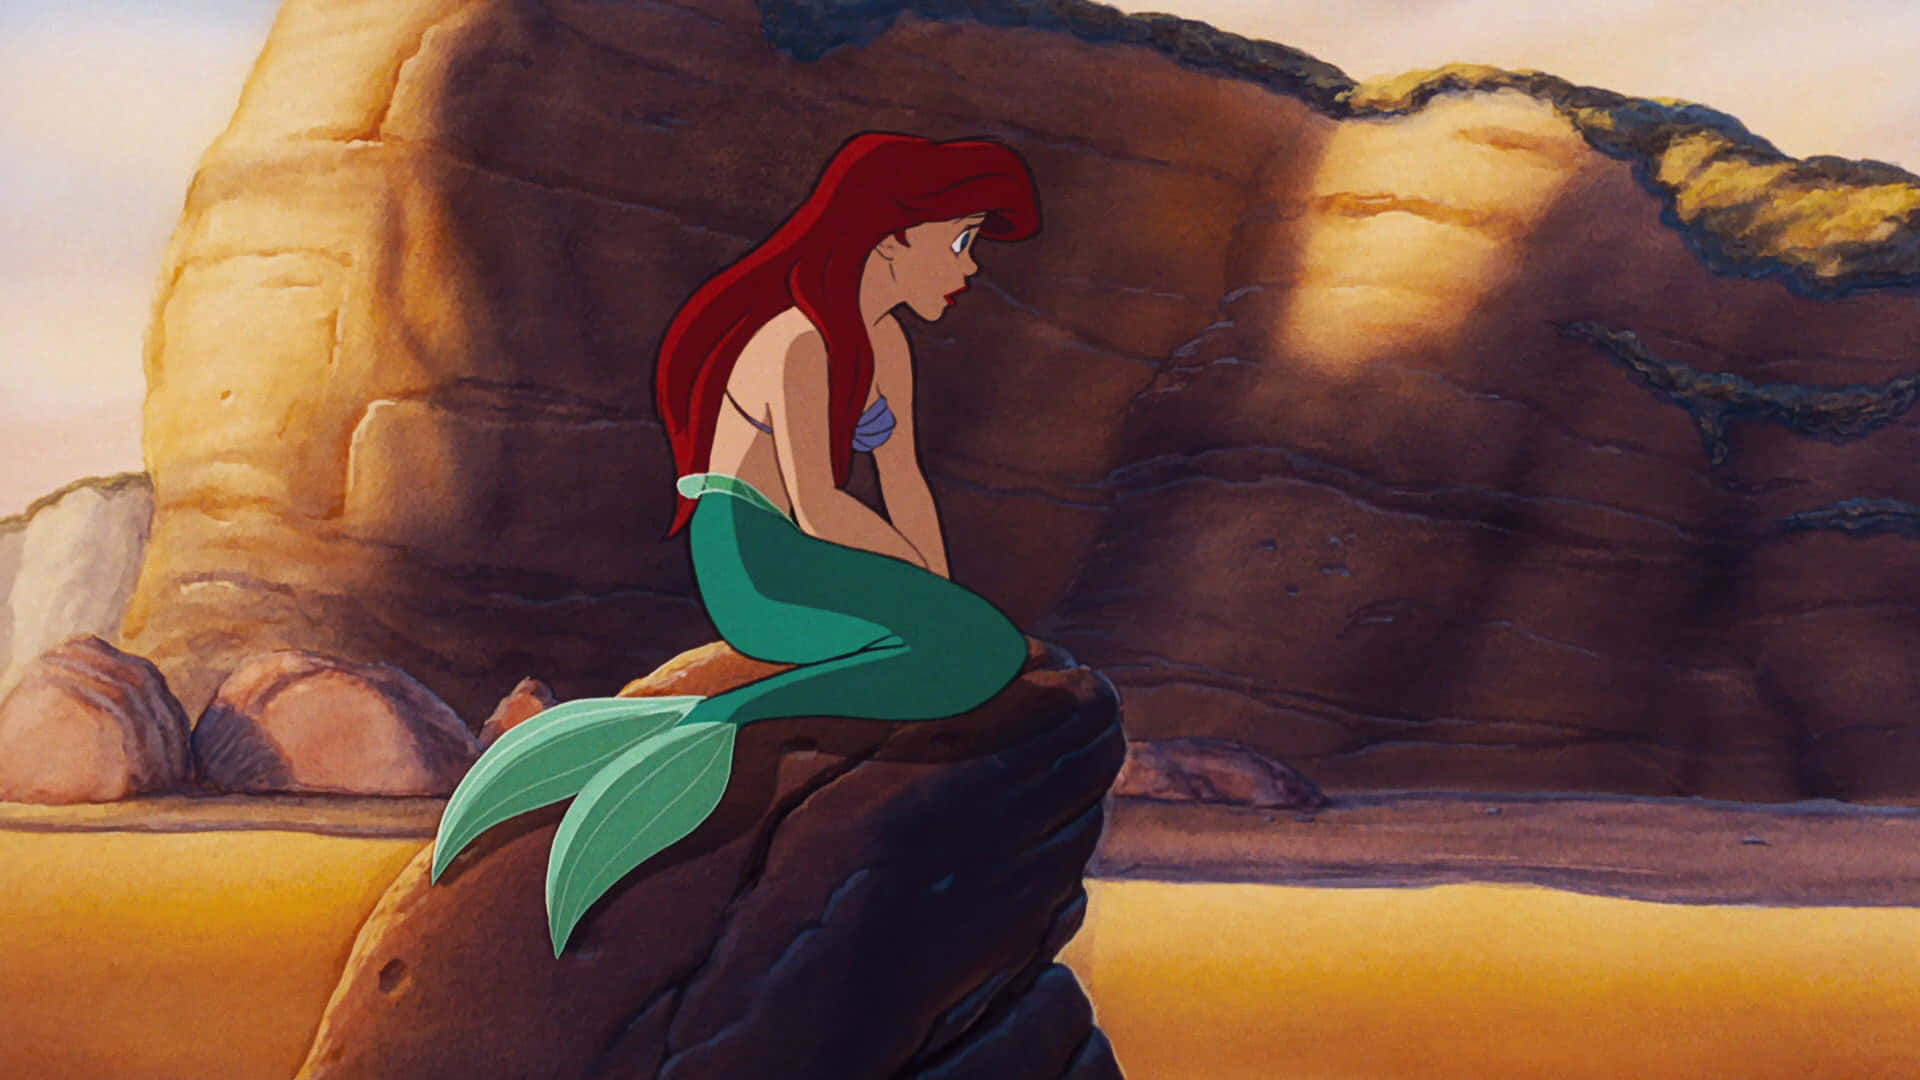 "Take life's sweetest moments and make them last forever" - Ariel